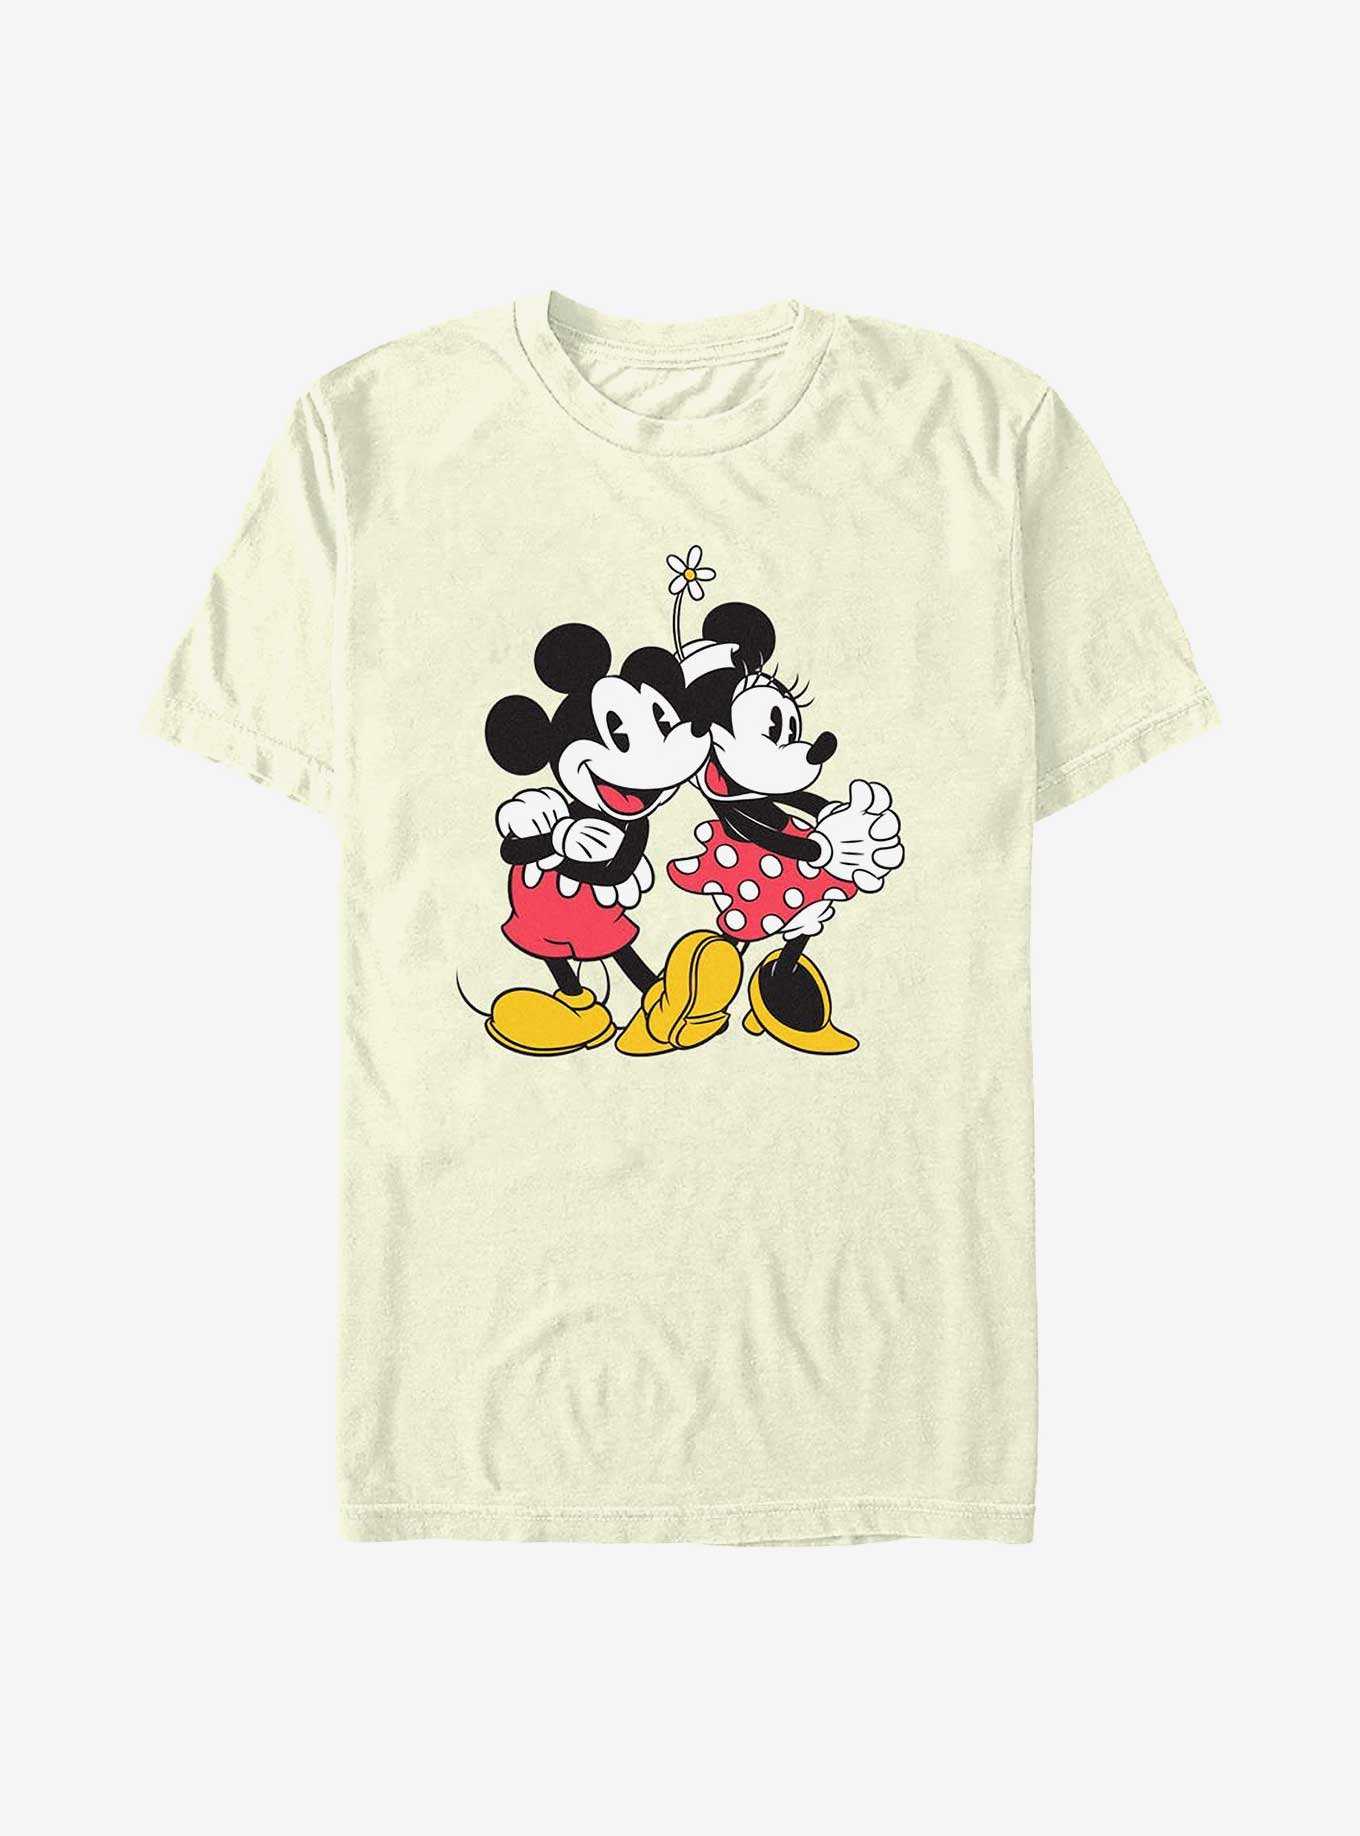 Disney Mickey Mouse & Minnie Mouse Golden Couple T-Shirt, , hi-res